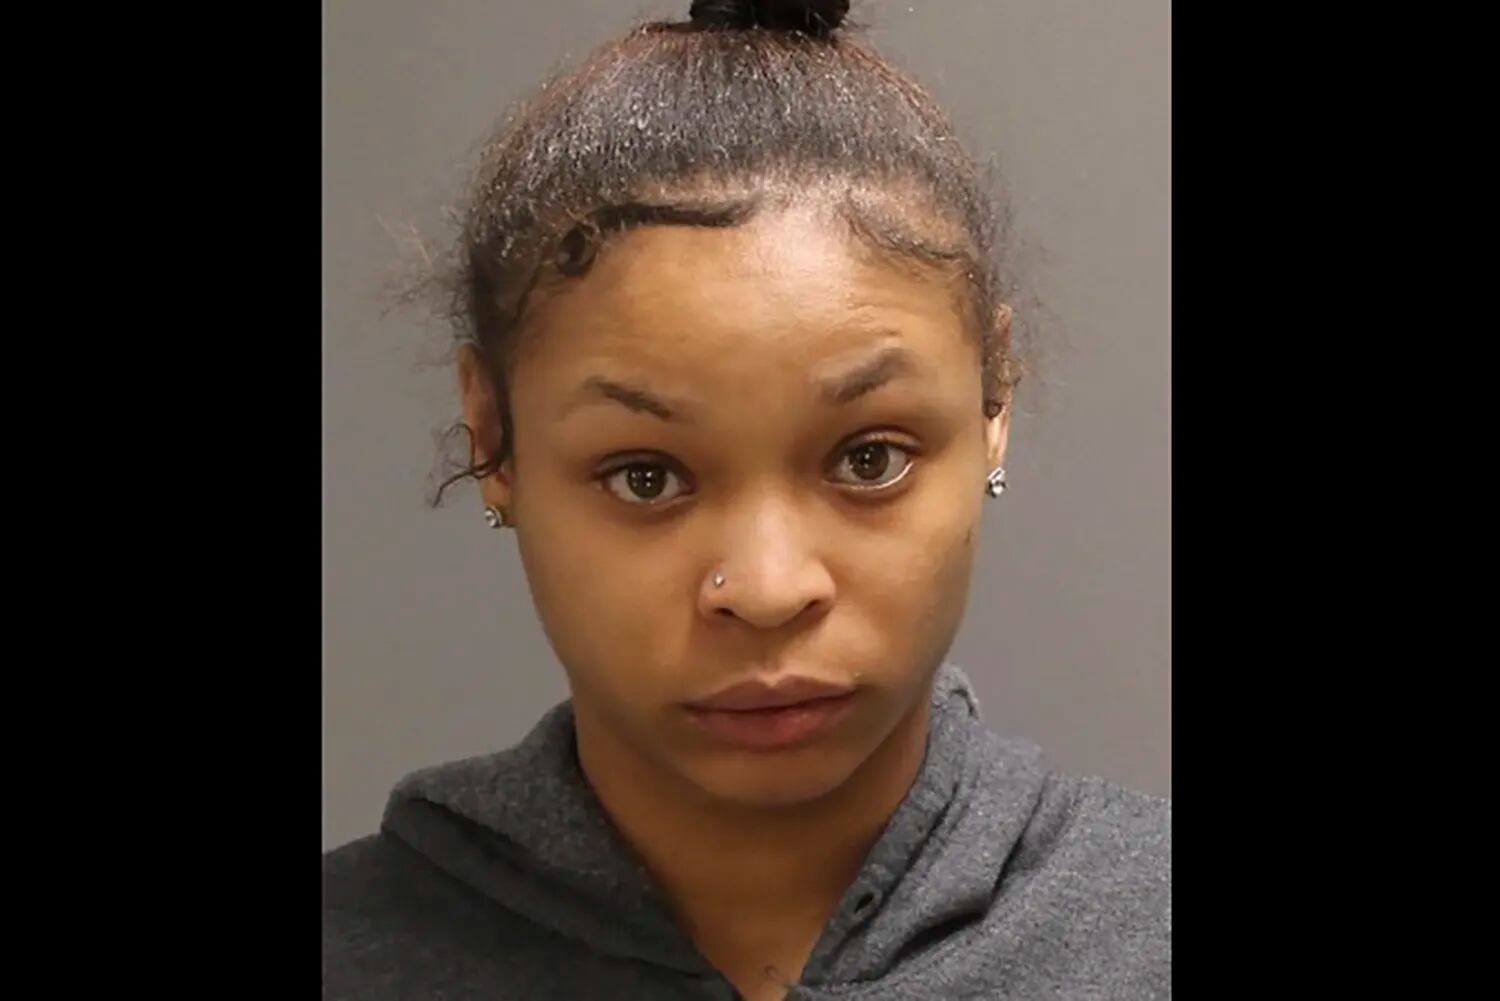 Jayana Tanae Webb Who Is She? Why Was She Arrested?